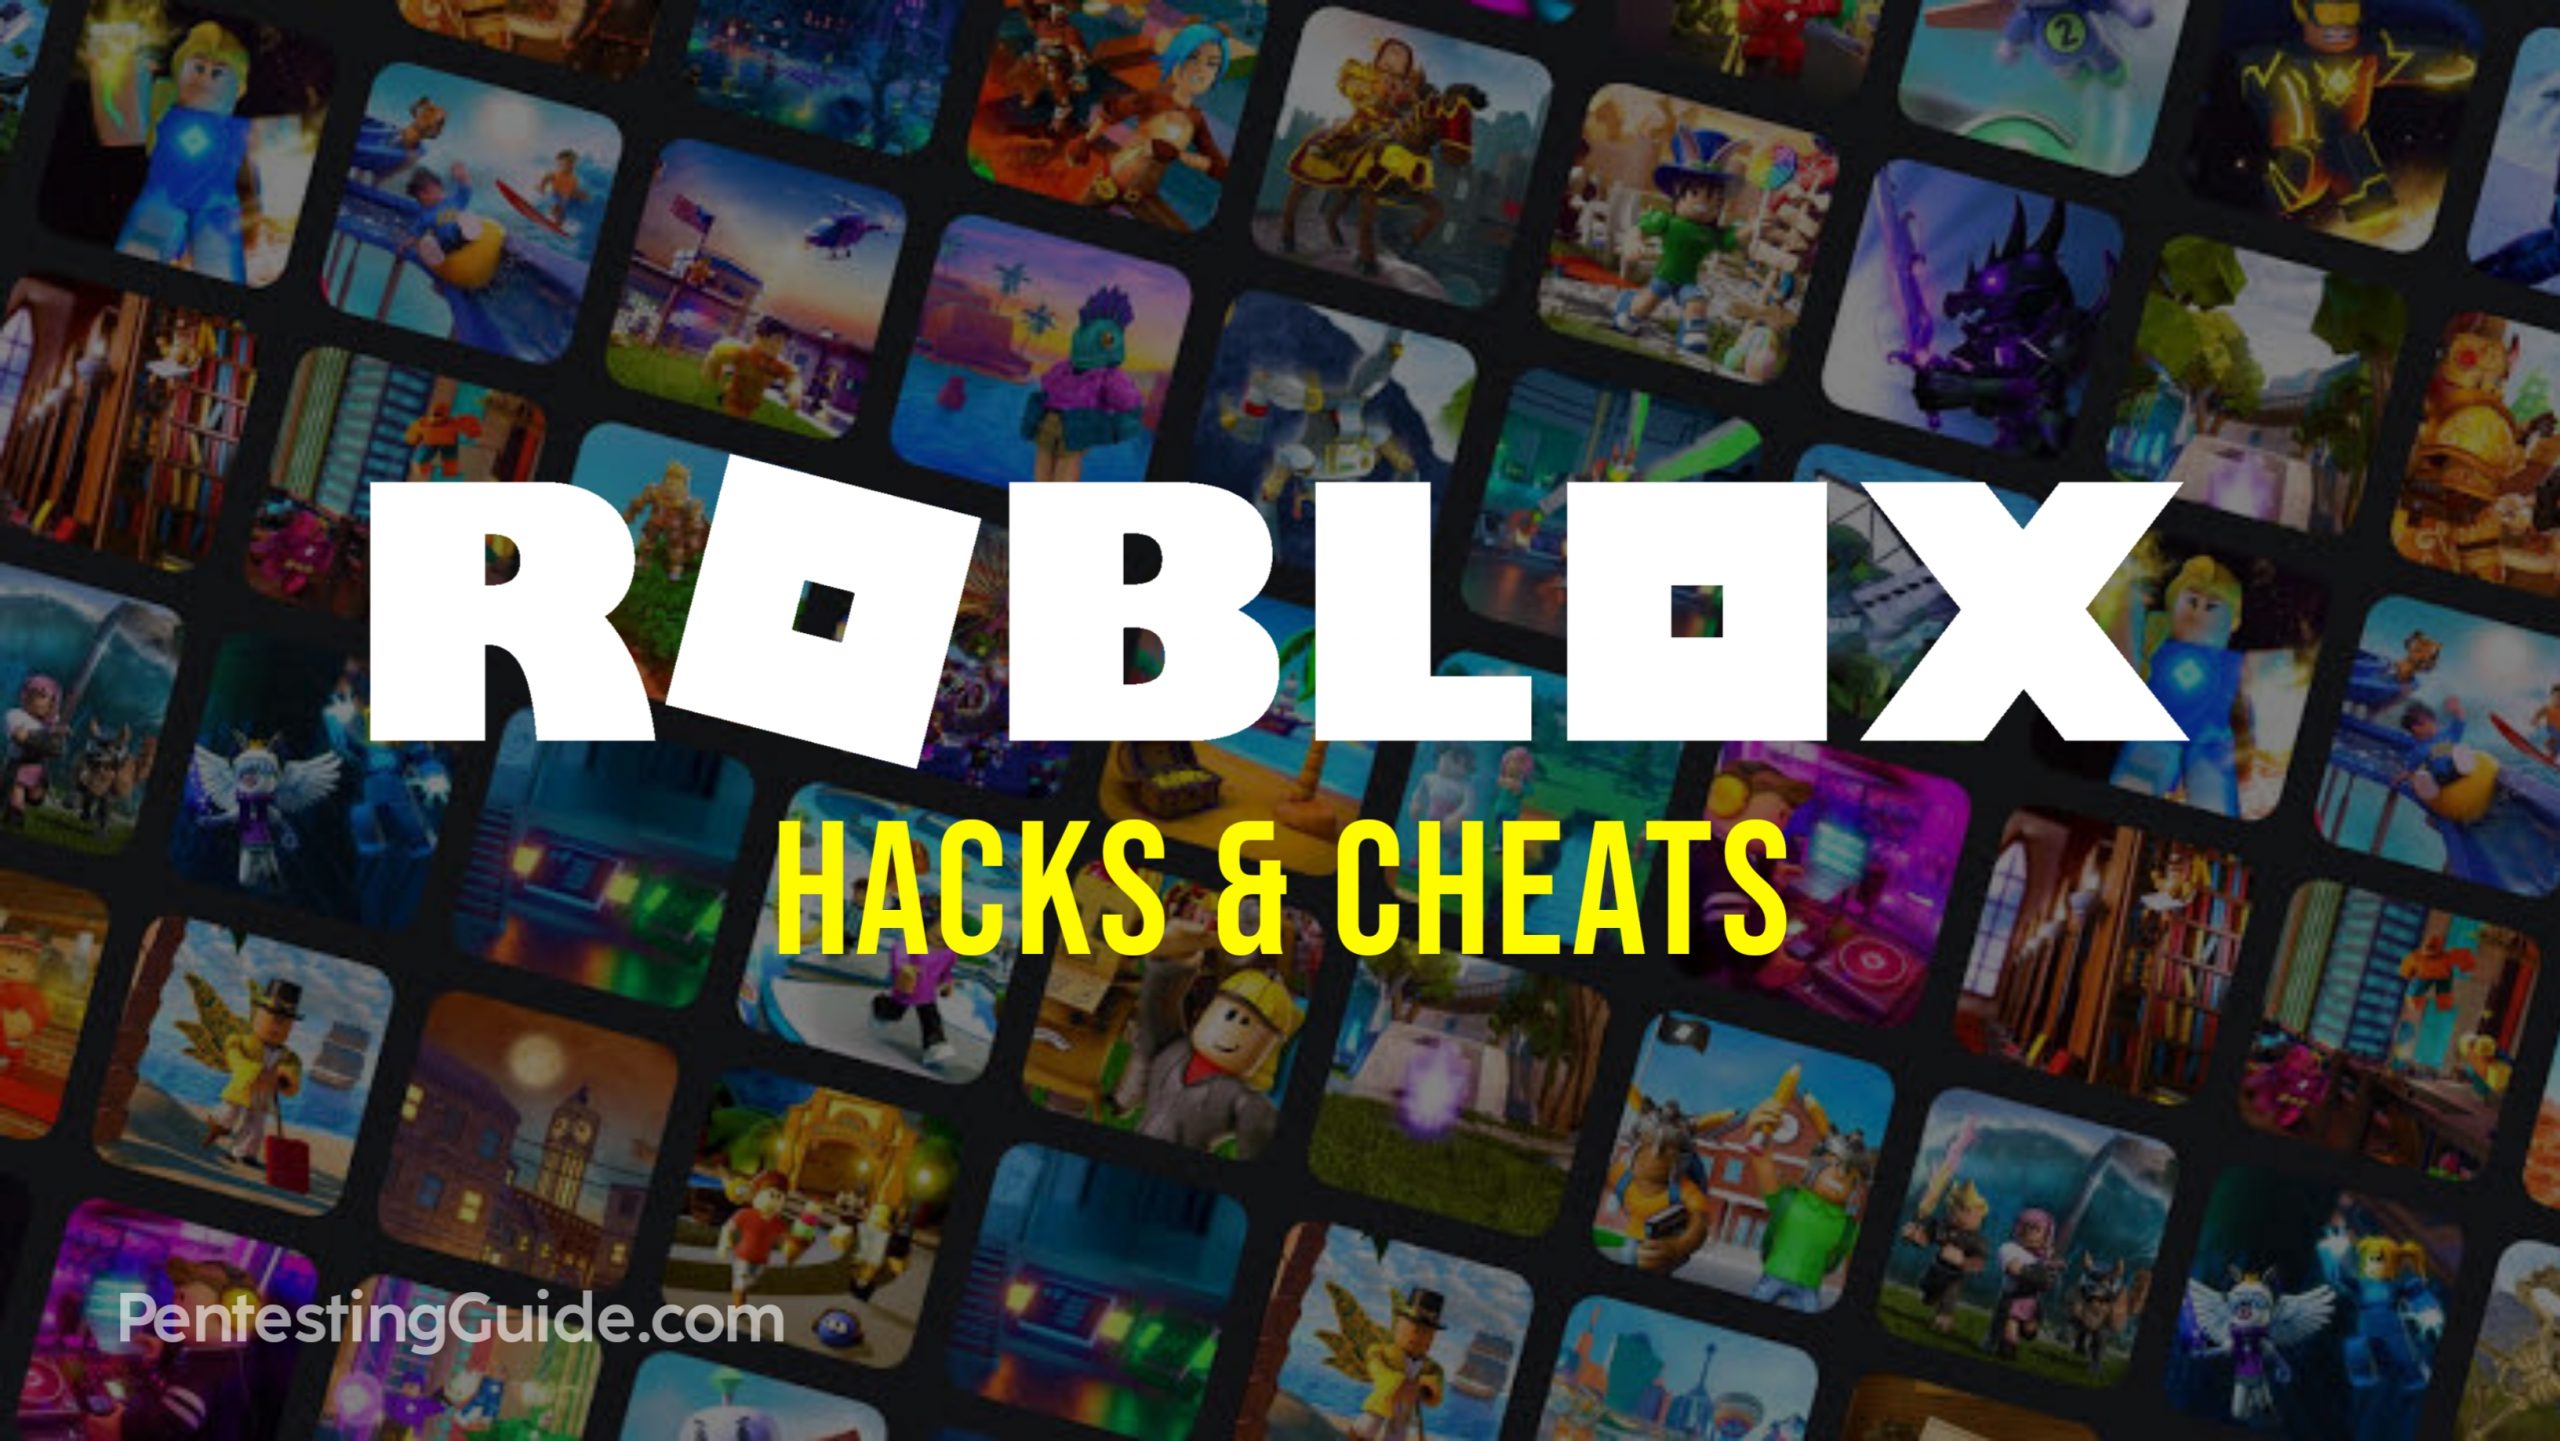 Top Cheats and Hacks for Roblox